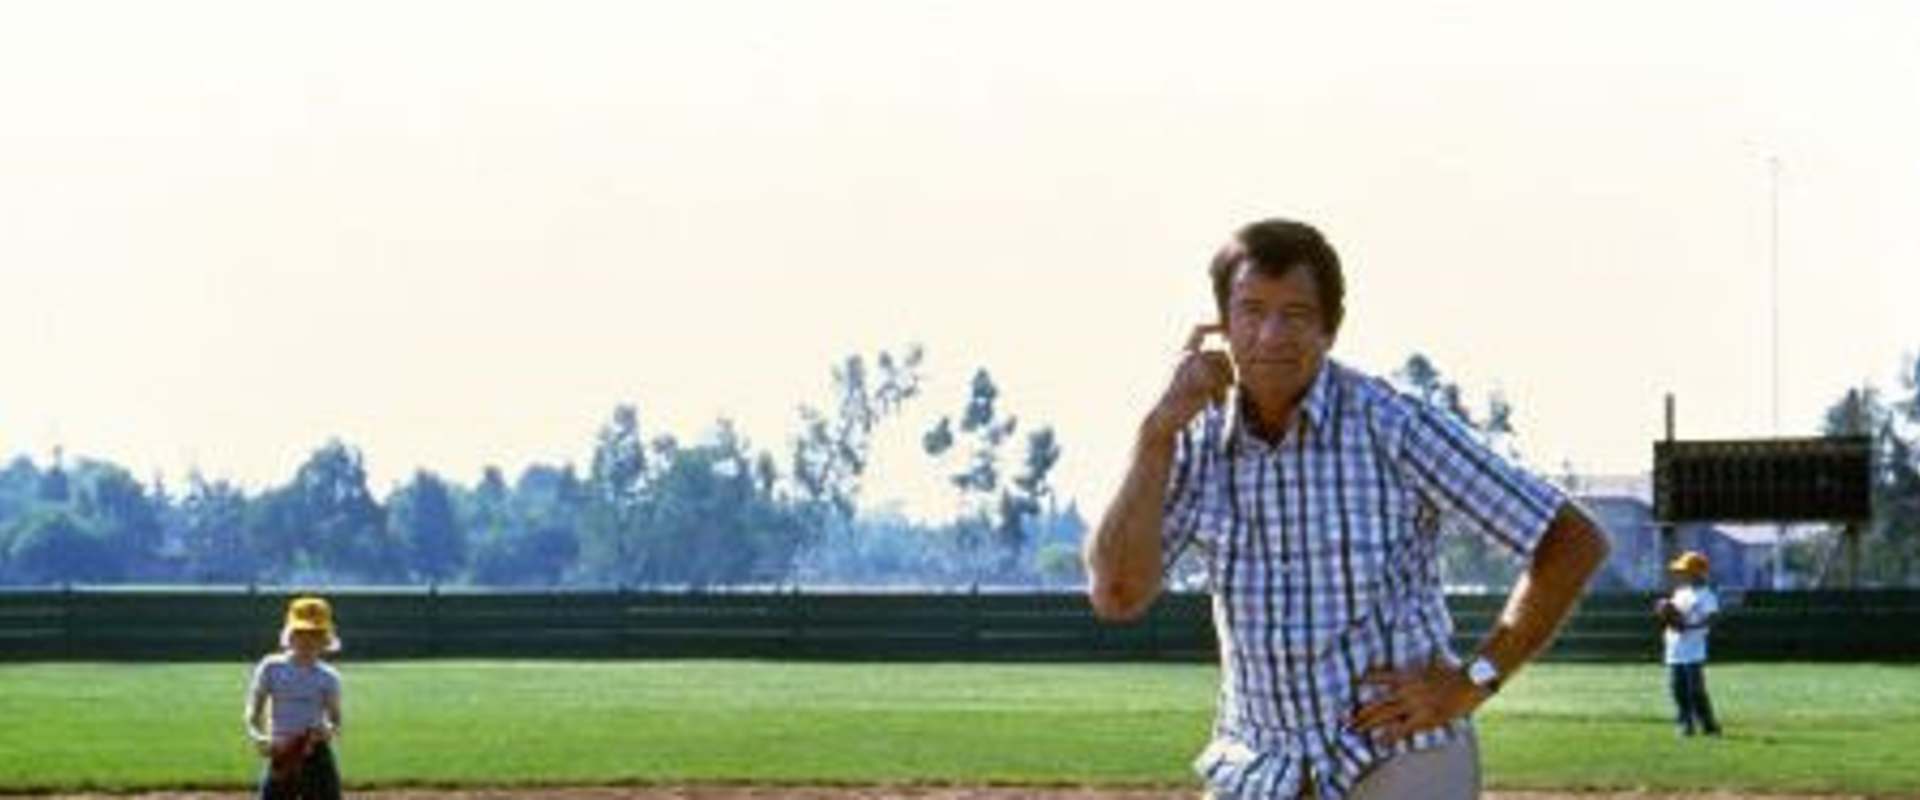 The Bad News Bears background 2